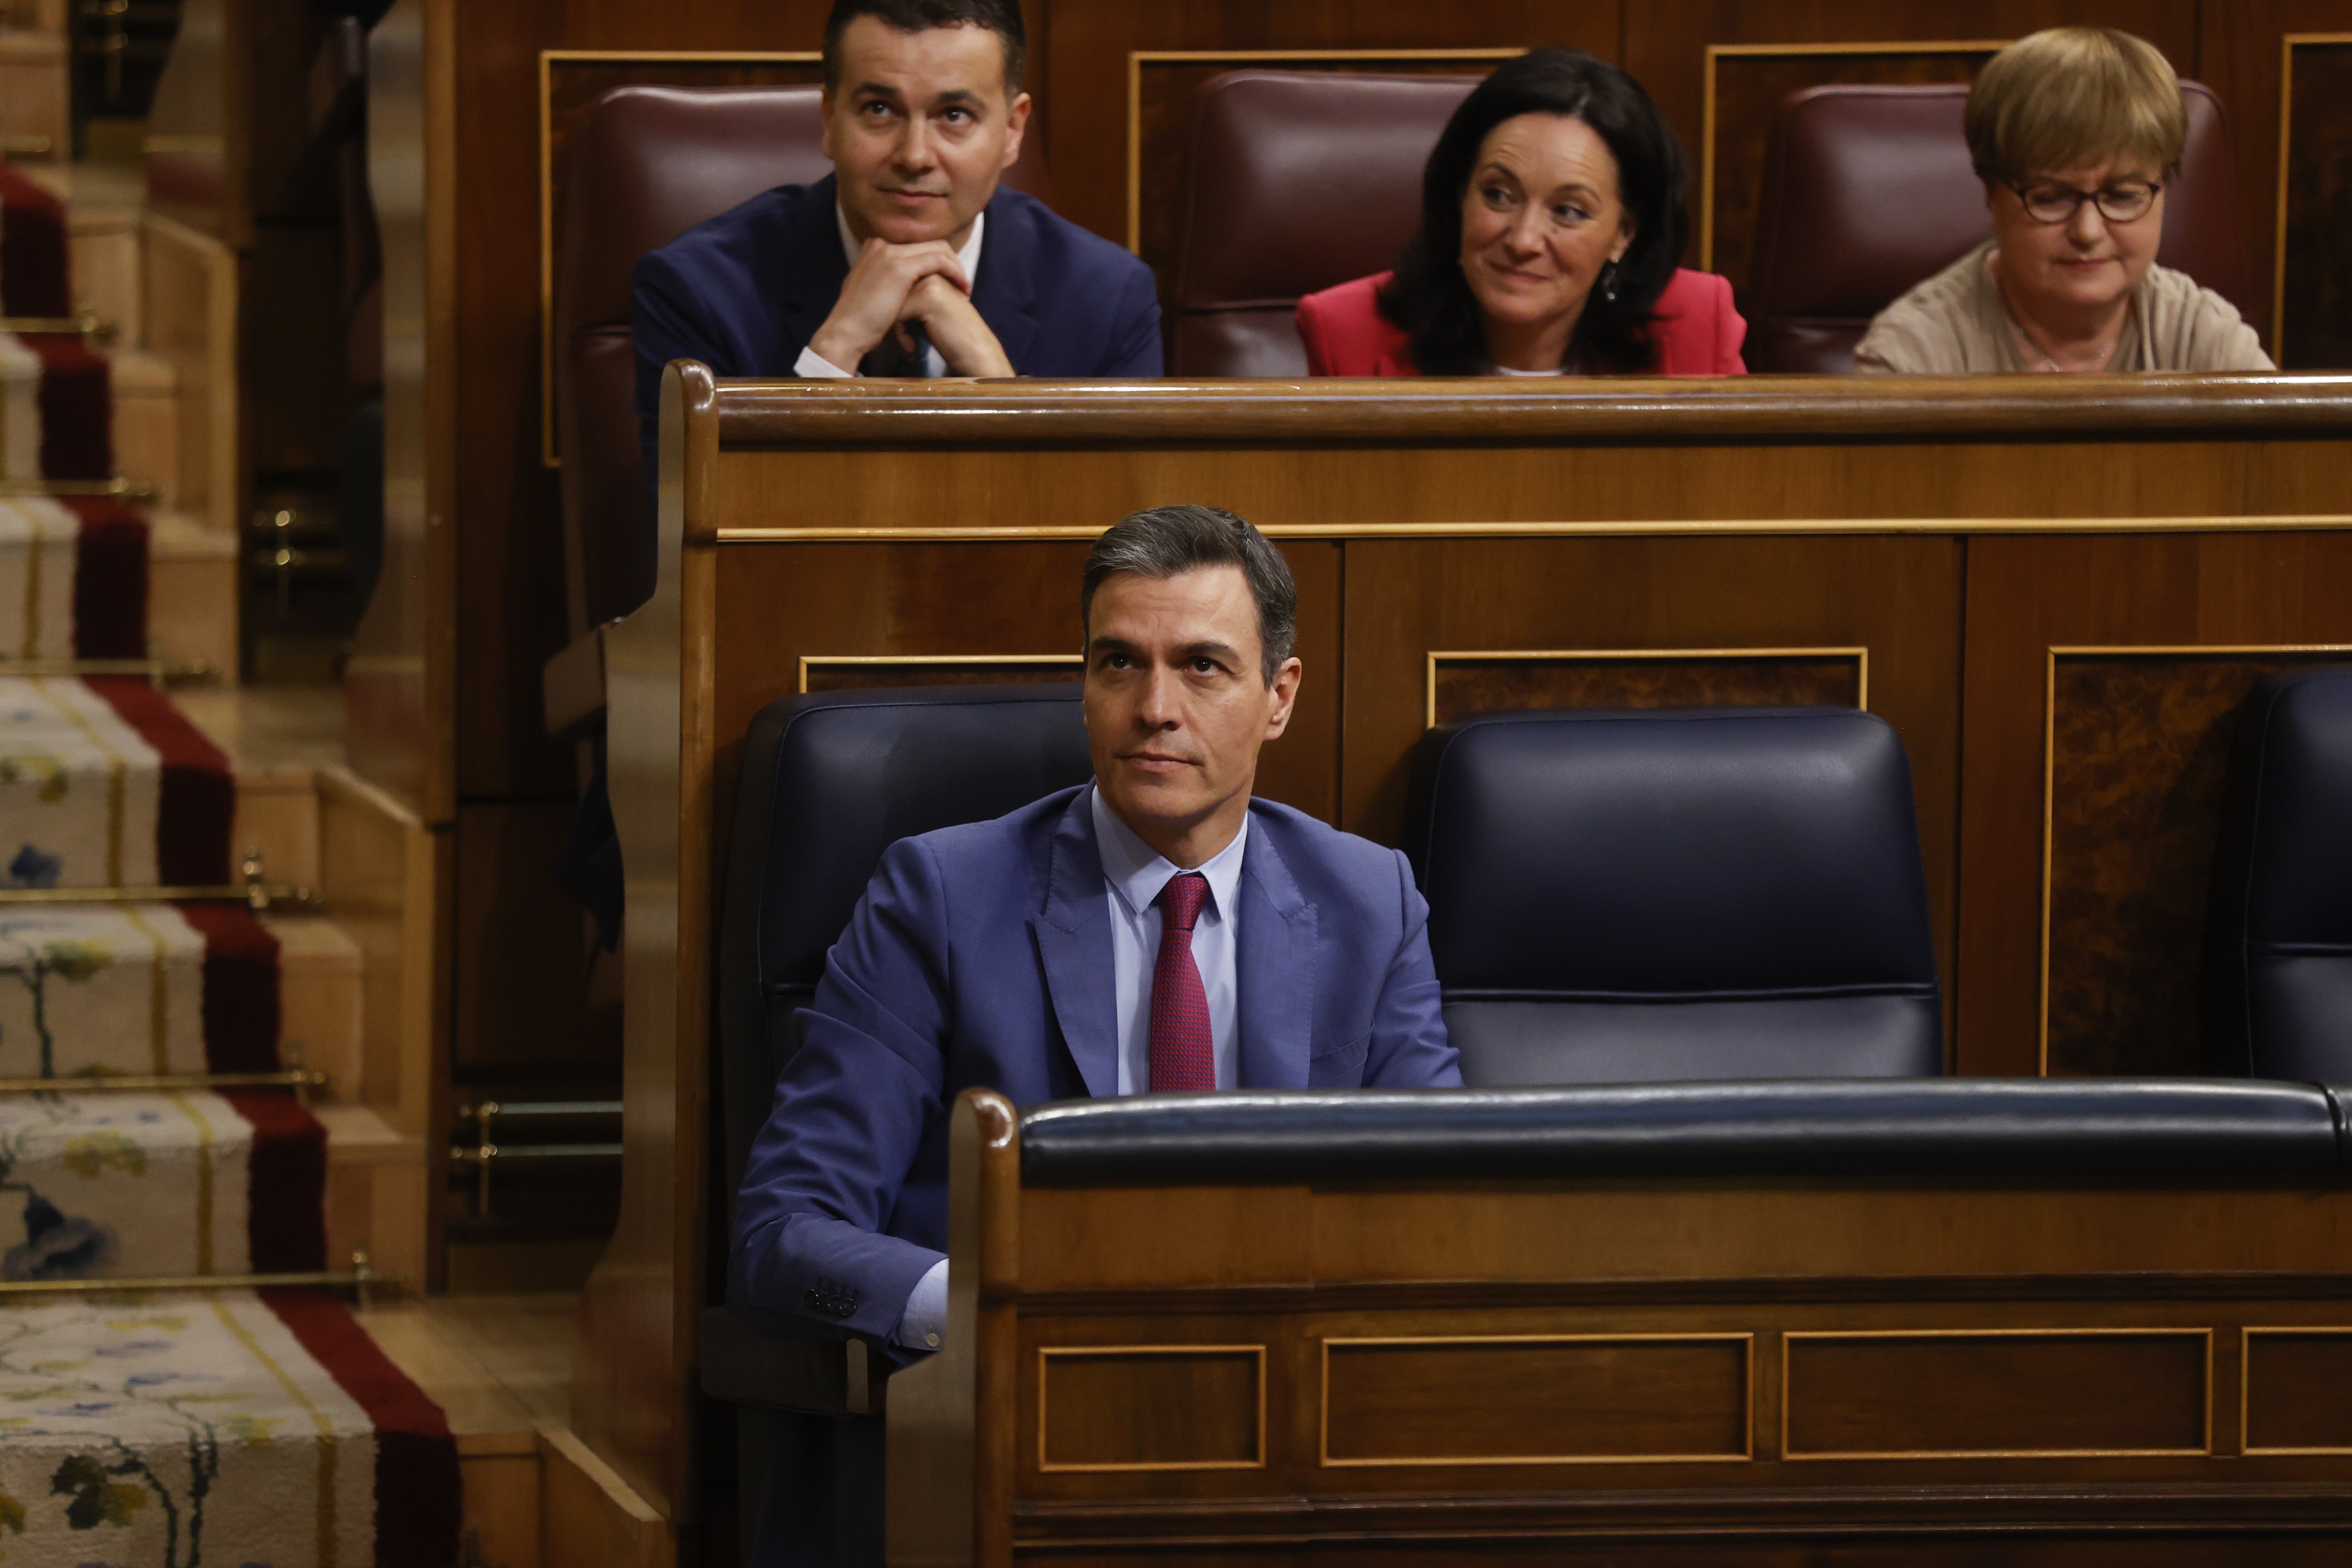 Sánchez wins vote, accuses Catalan parties of "unhealthy politics" and backs Robles